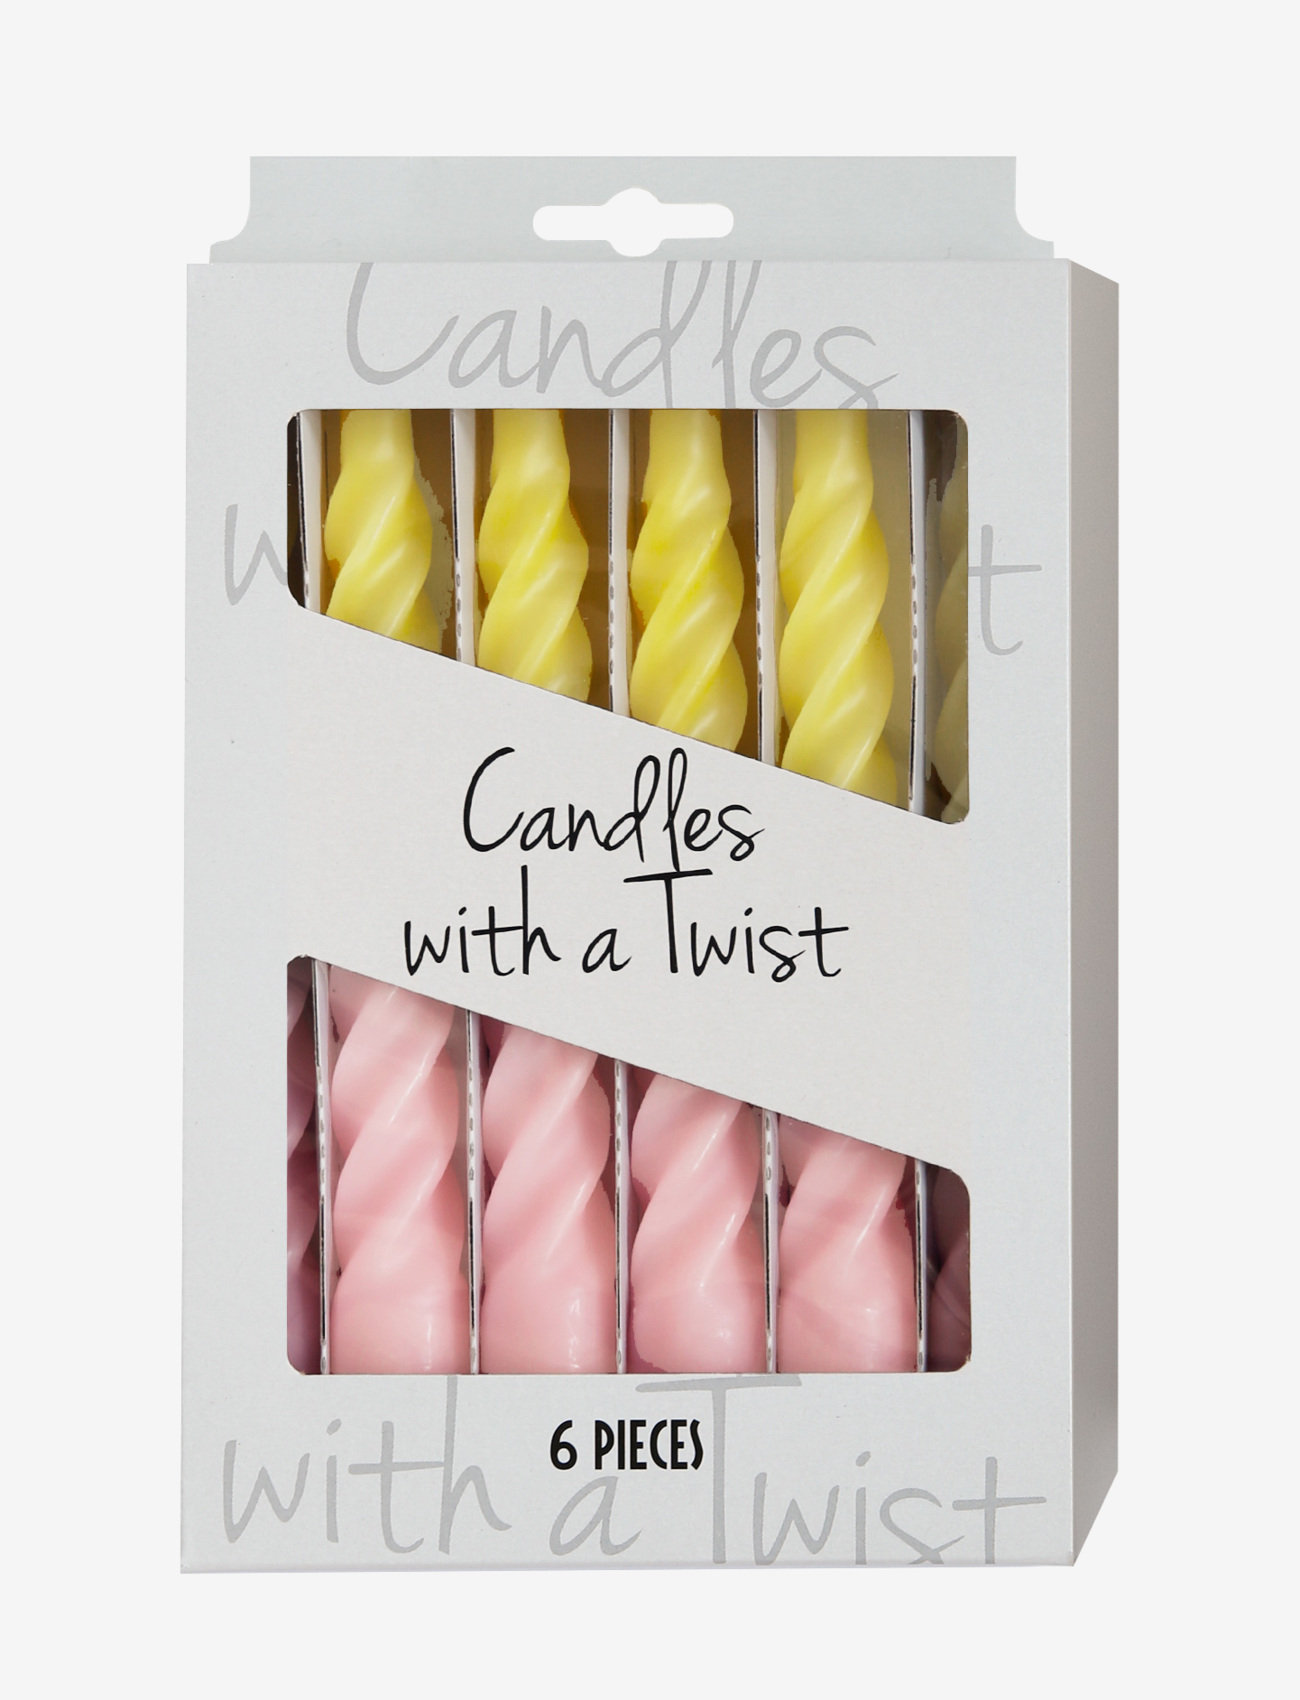 Kunstindustrien - Twisted Candles, 6 piece box, multi colored - de laveste prisene - yellow and pink with a white belt - 1